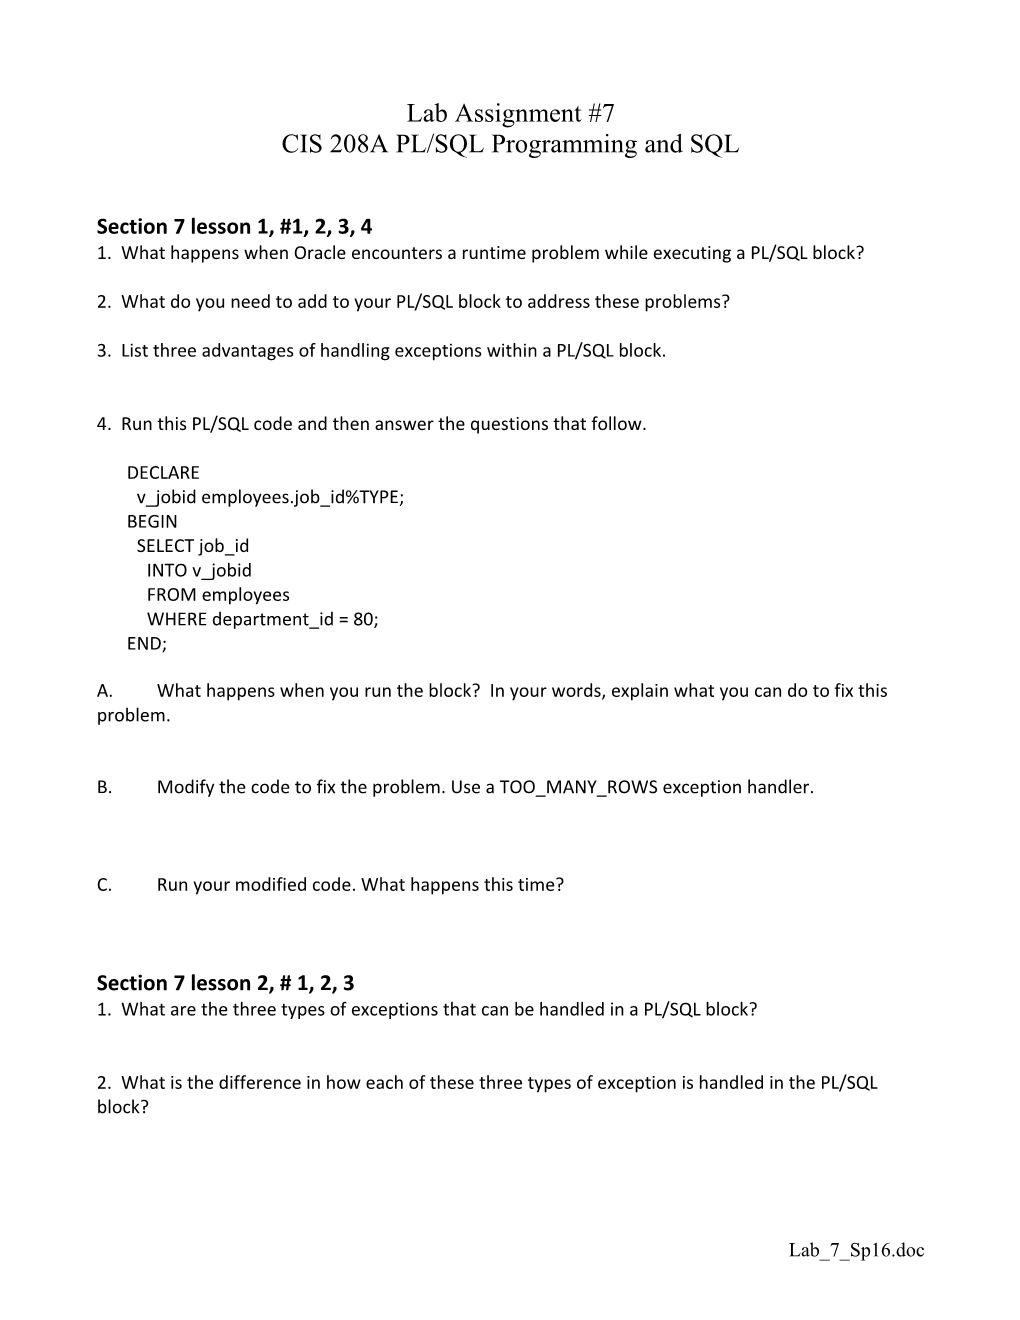 Lab Assignment #7 CIS 208A PL/SQL Programming and SQL